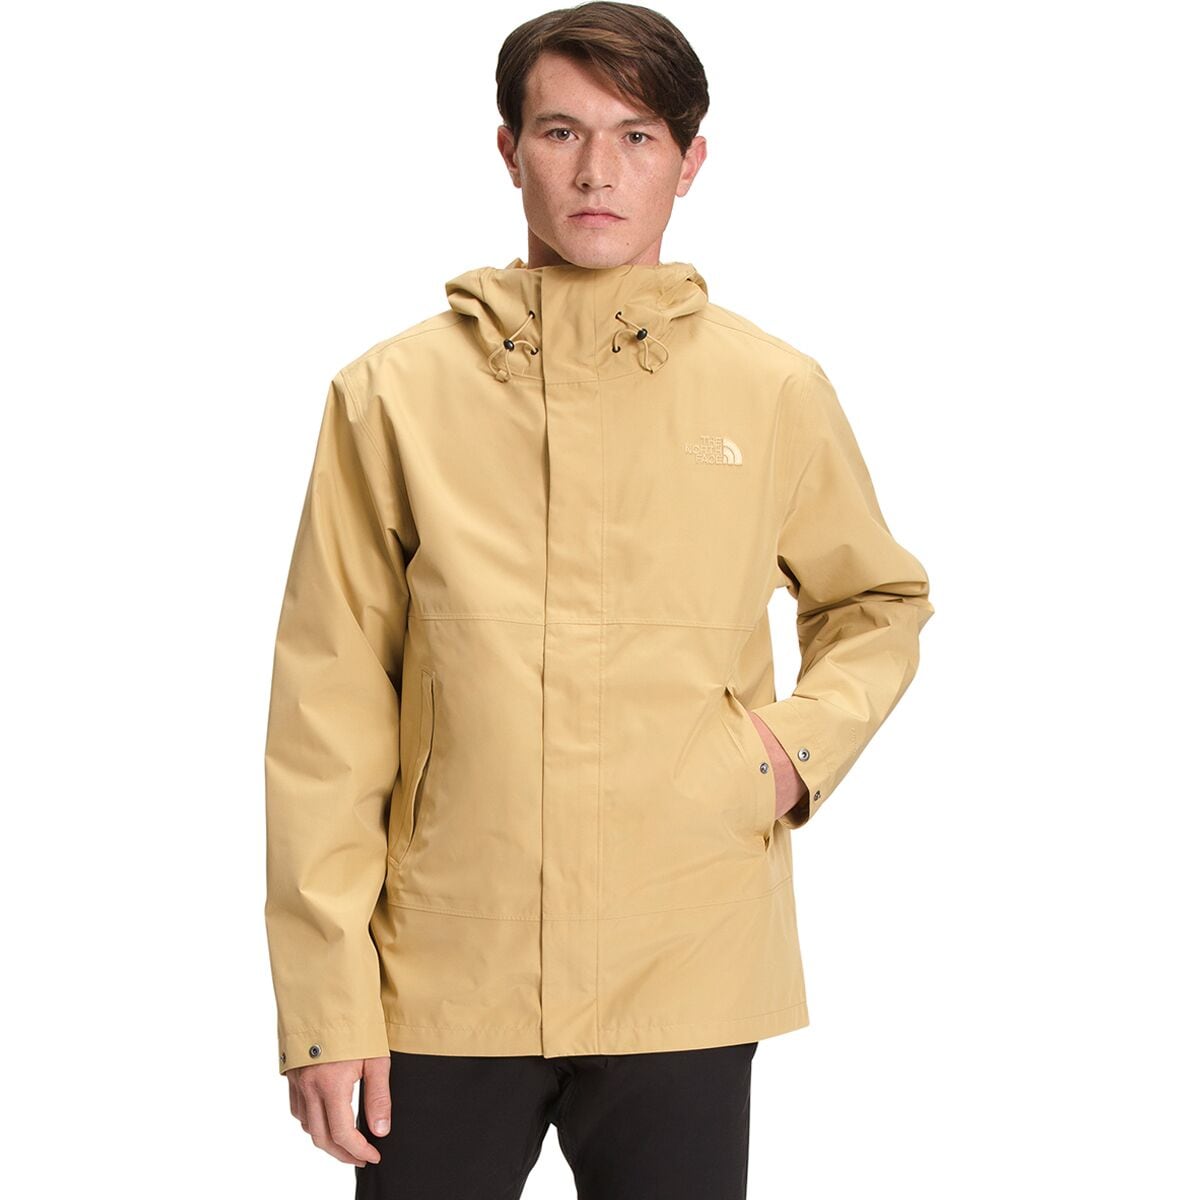 The North Face Woodmont Jacket - Men's